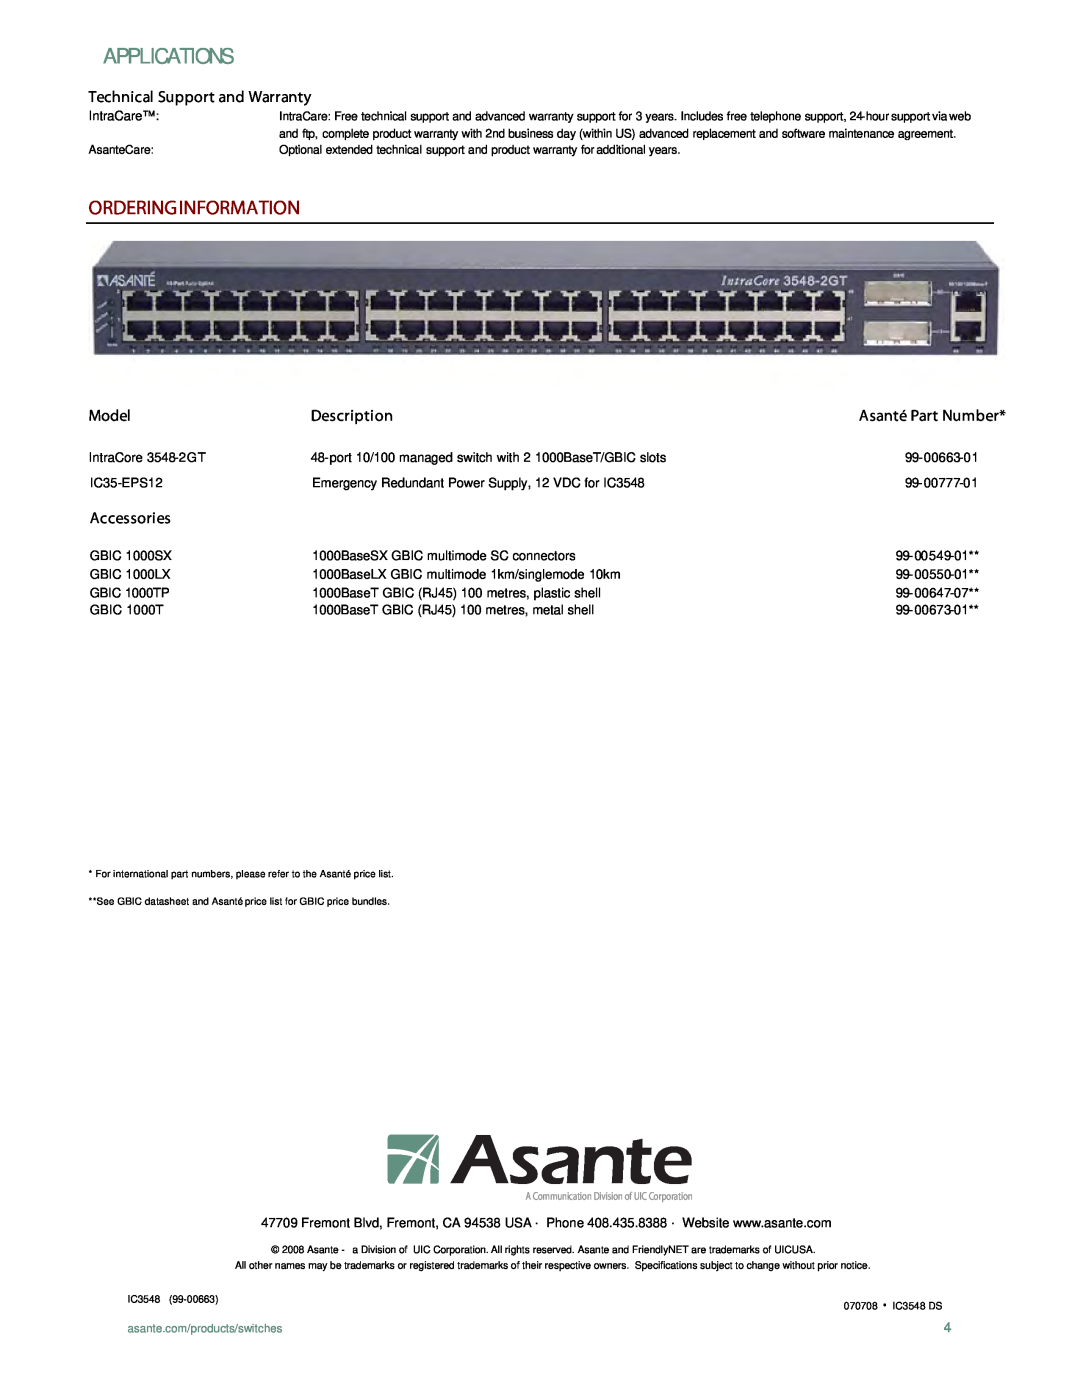 Asante Technologies 3548-2GT Series Orderinginformation, Applications, Technical Support and Warranty, Model, Description 